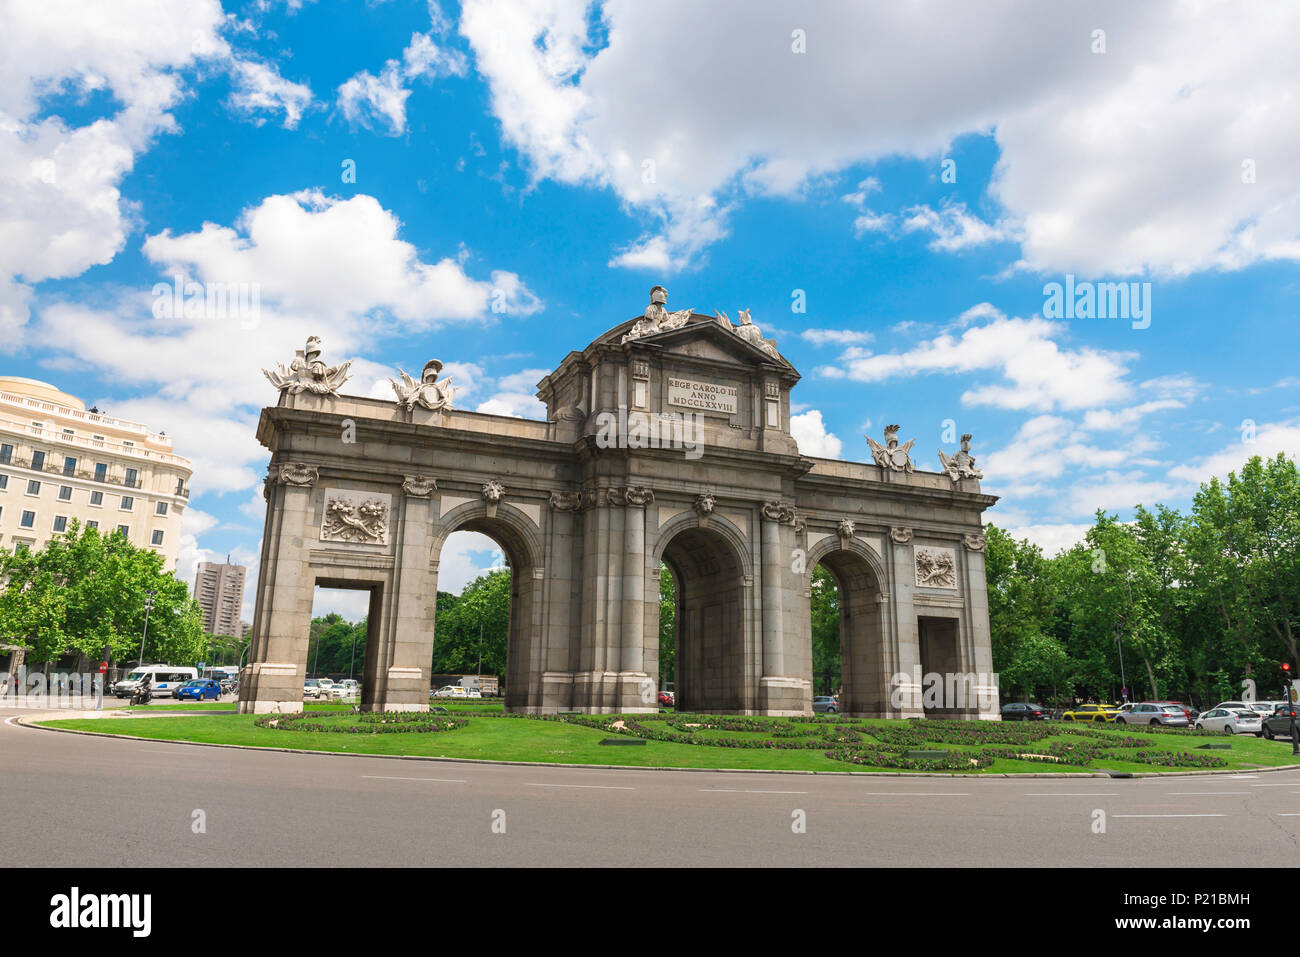 Plaza de la Independencia Madrid, view of the old city gate - the Puerta Alcala - in the Plaza de la Independencia, Madrid, Spain. Stock Photo